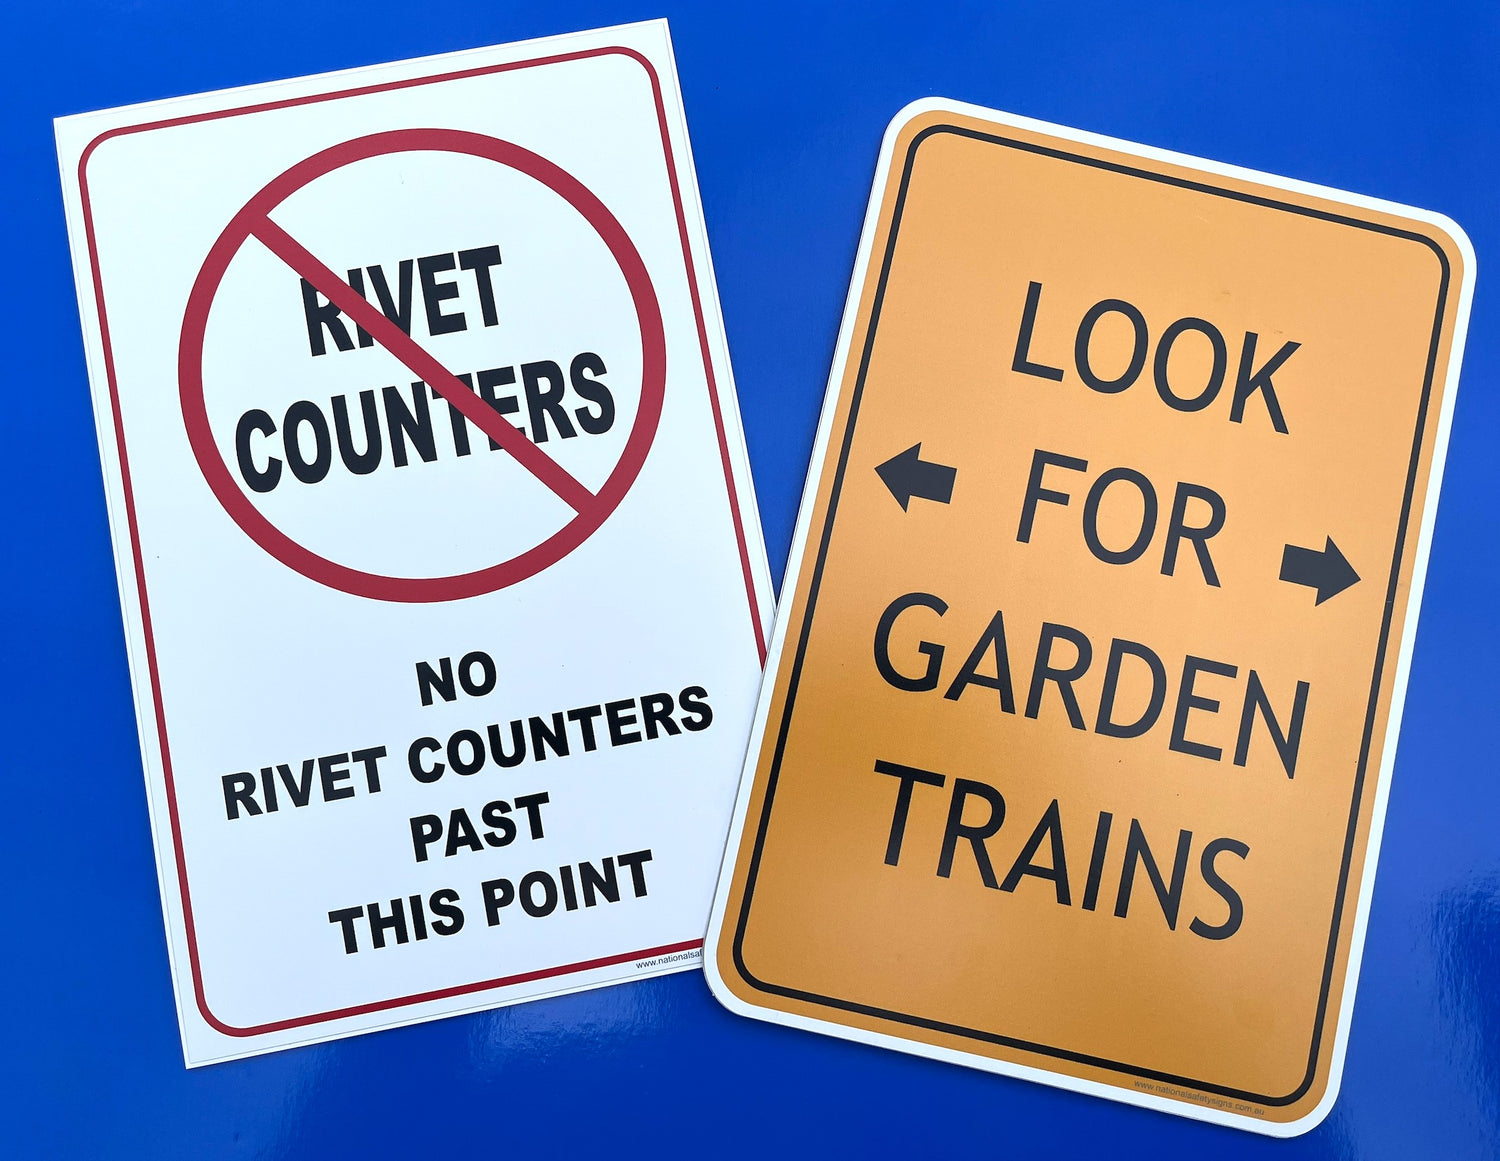 Train Related Signs